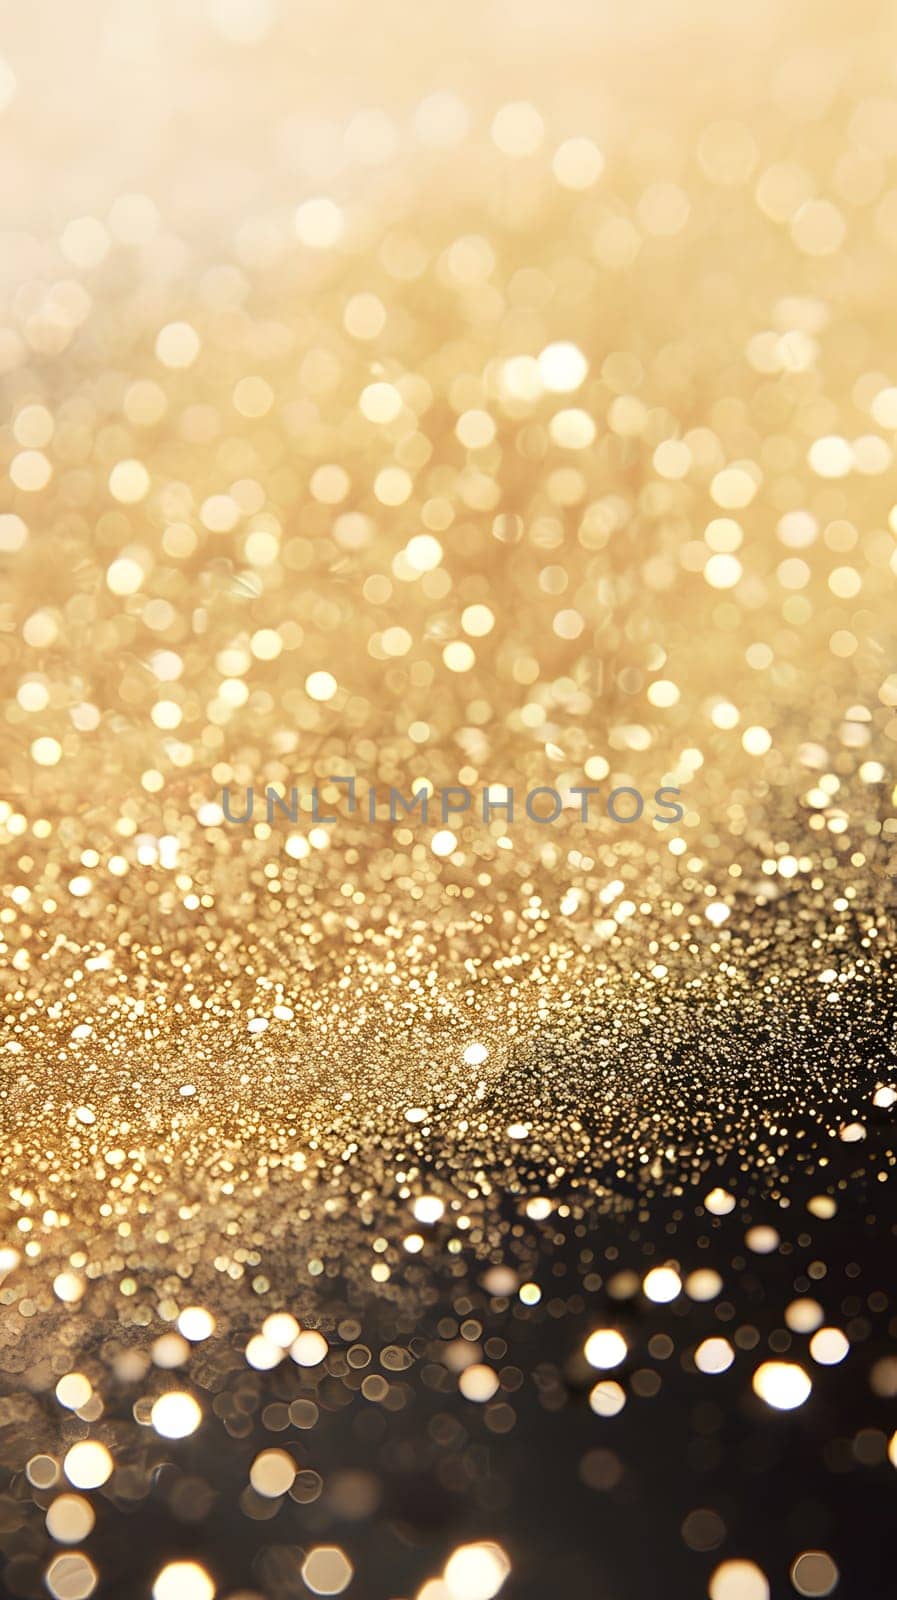 Macro shot of liquid gold and black glitter creating a dazzling pattern by Nadtochiy